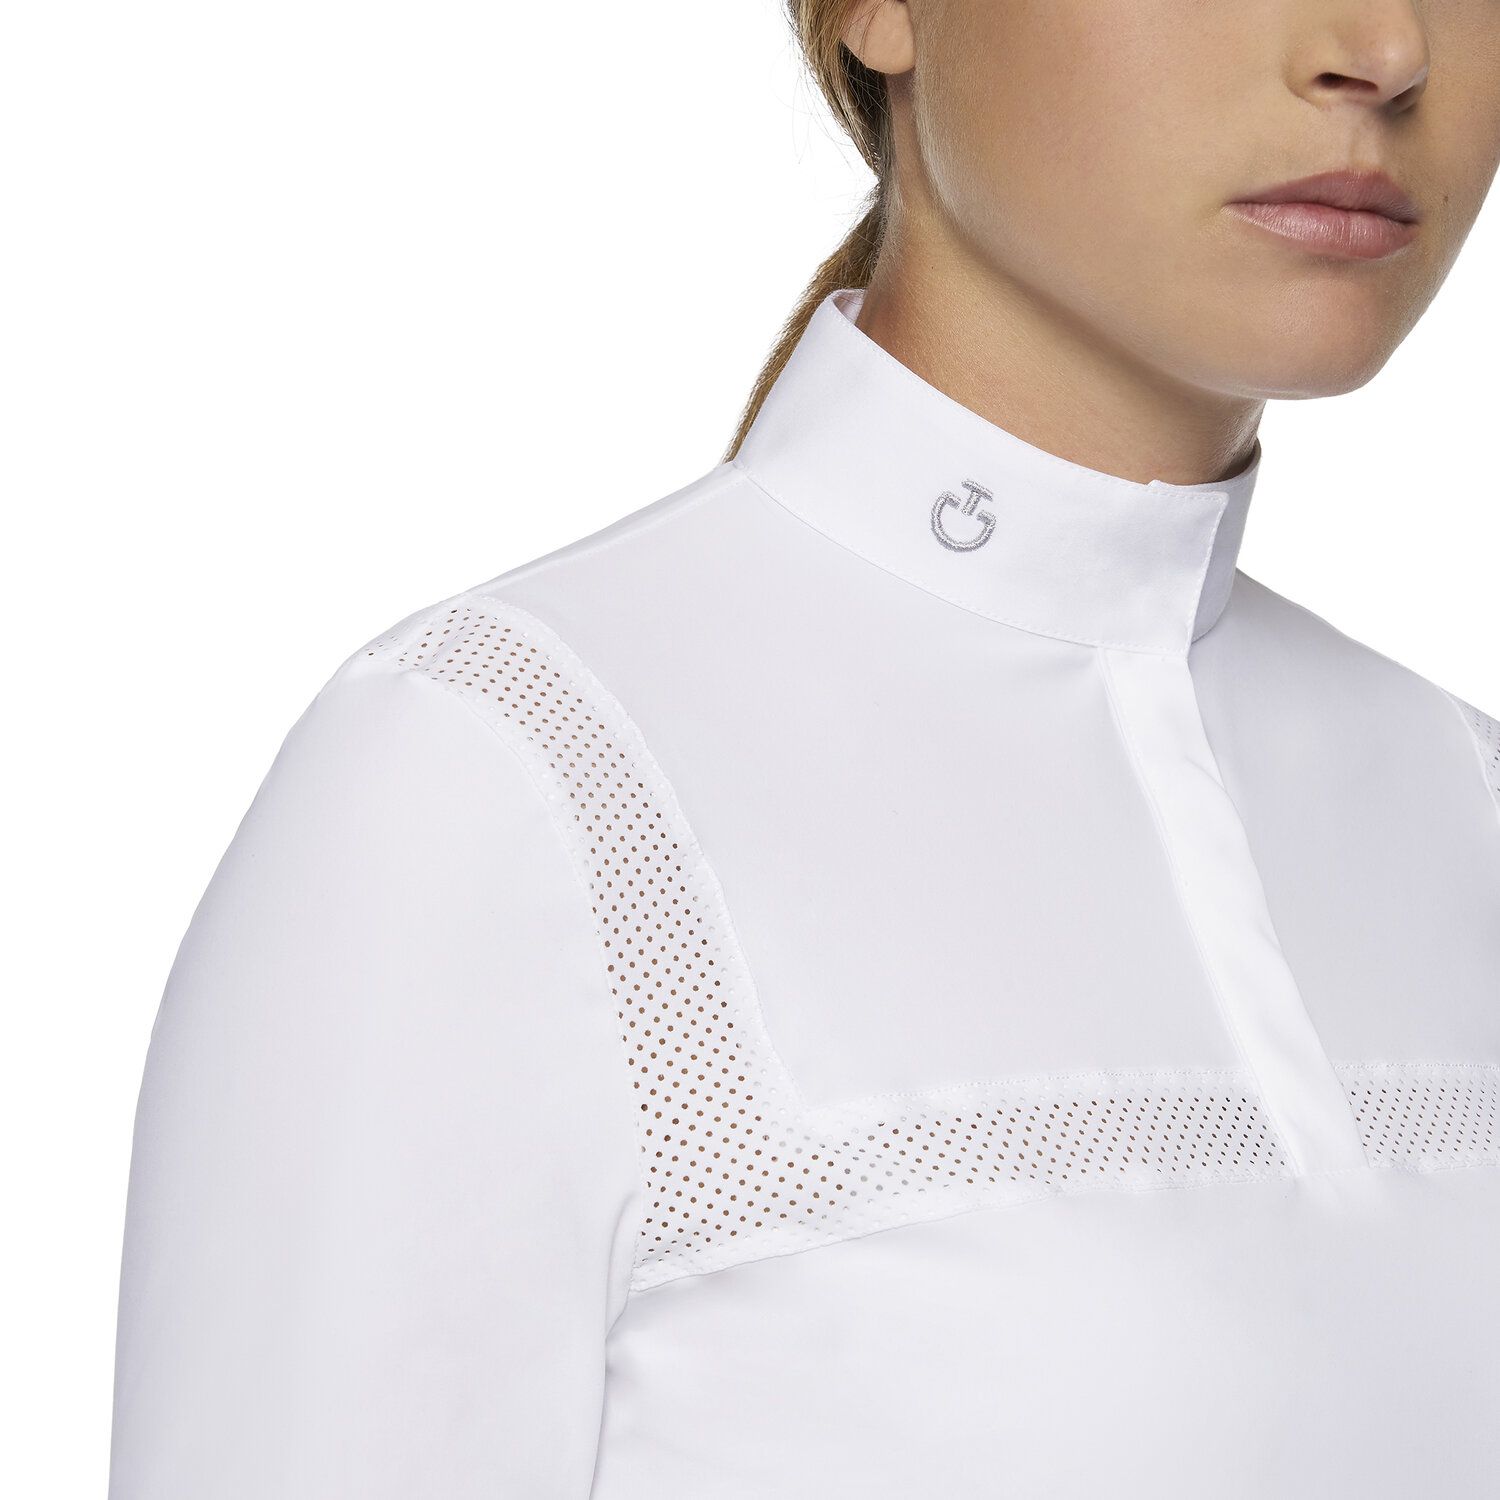 Cavalleria Toscana Long-sleeved shirt with perforated insert WHITE/KNIT-4